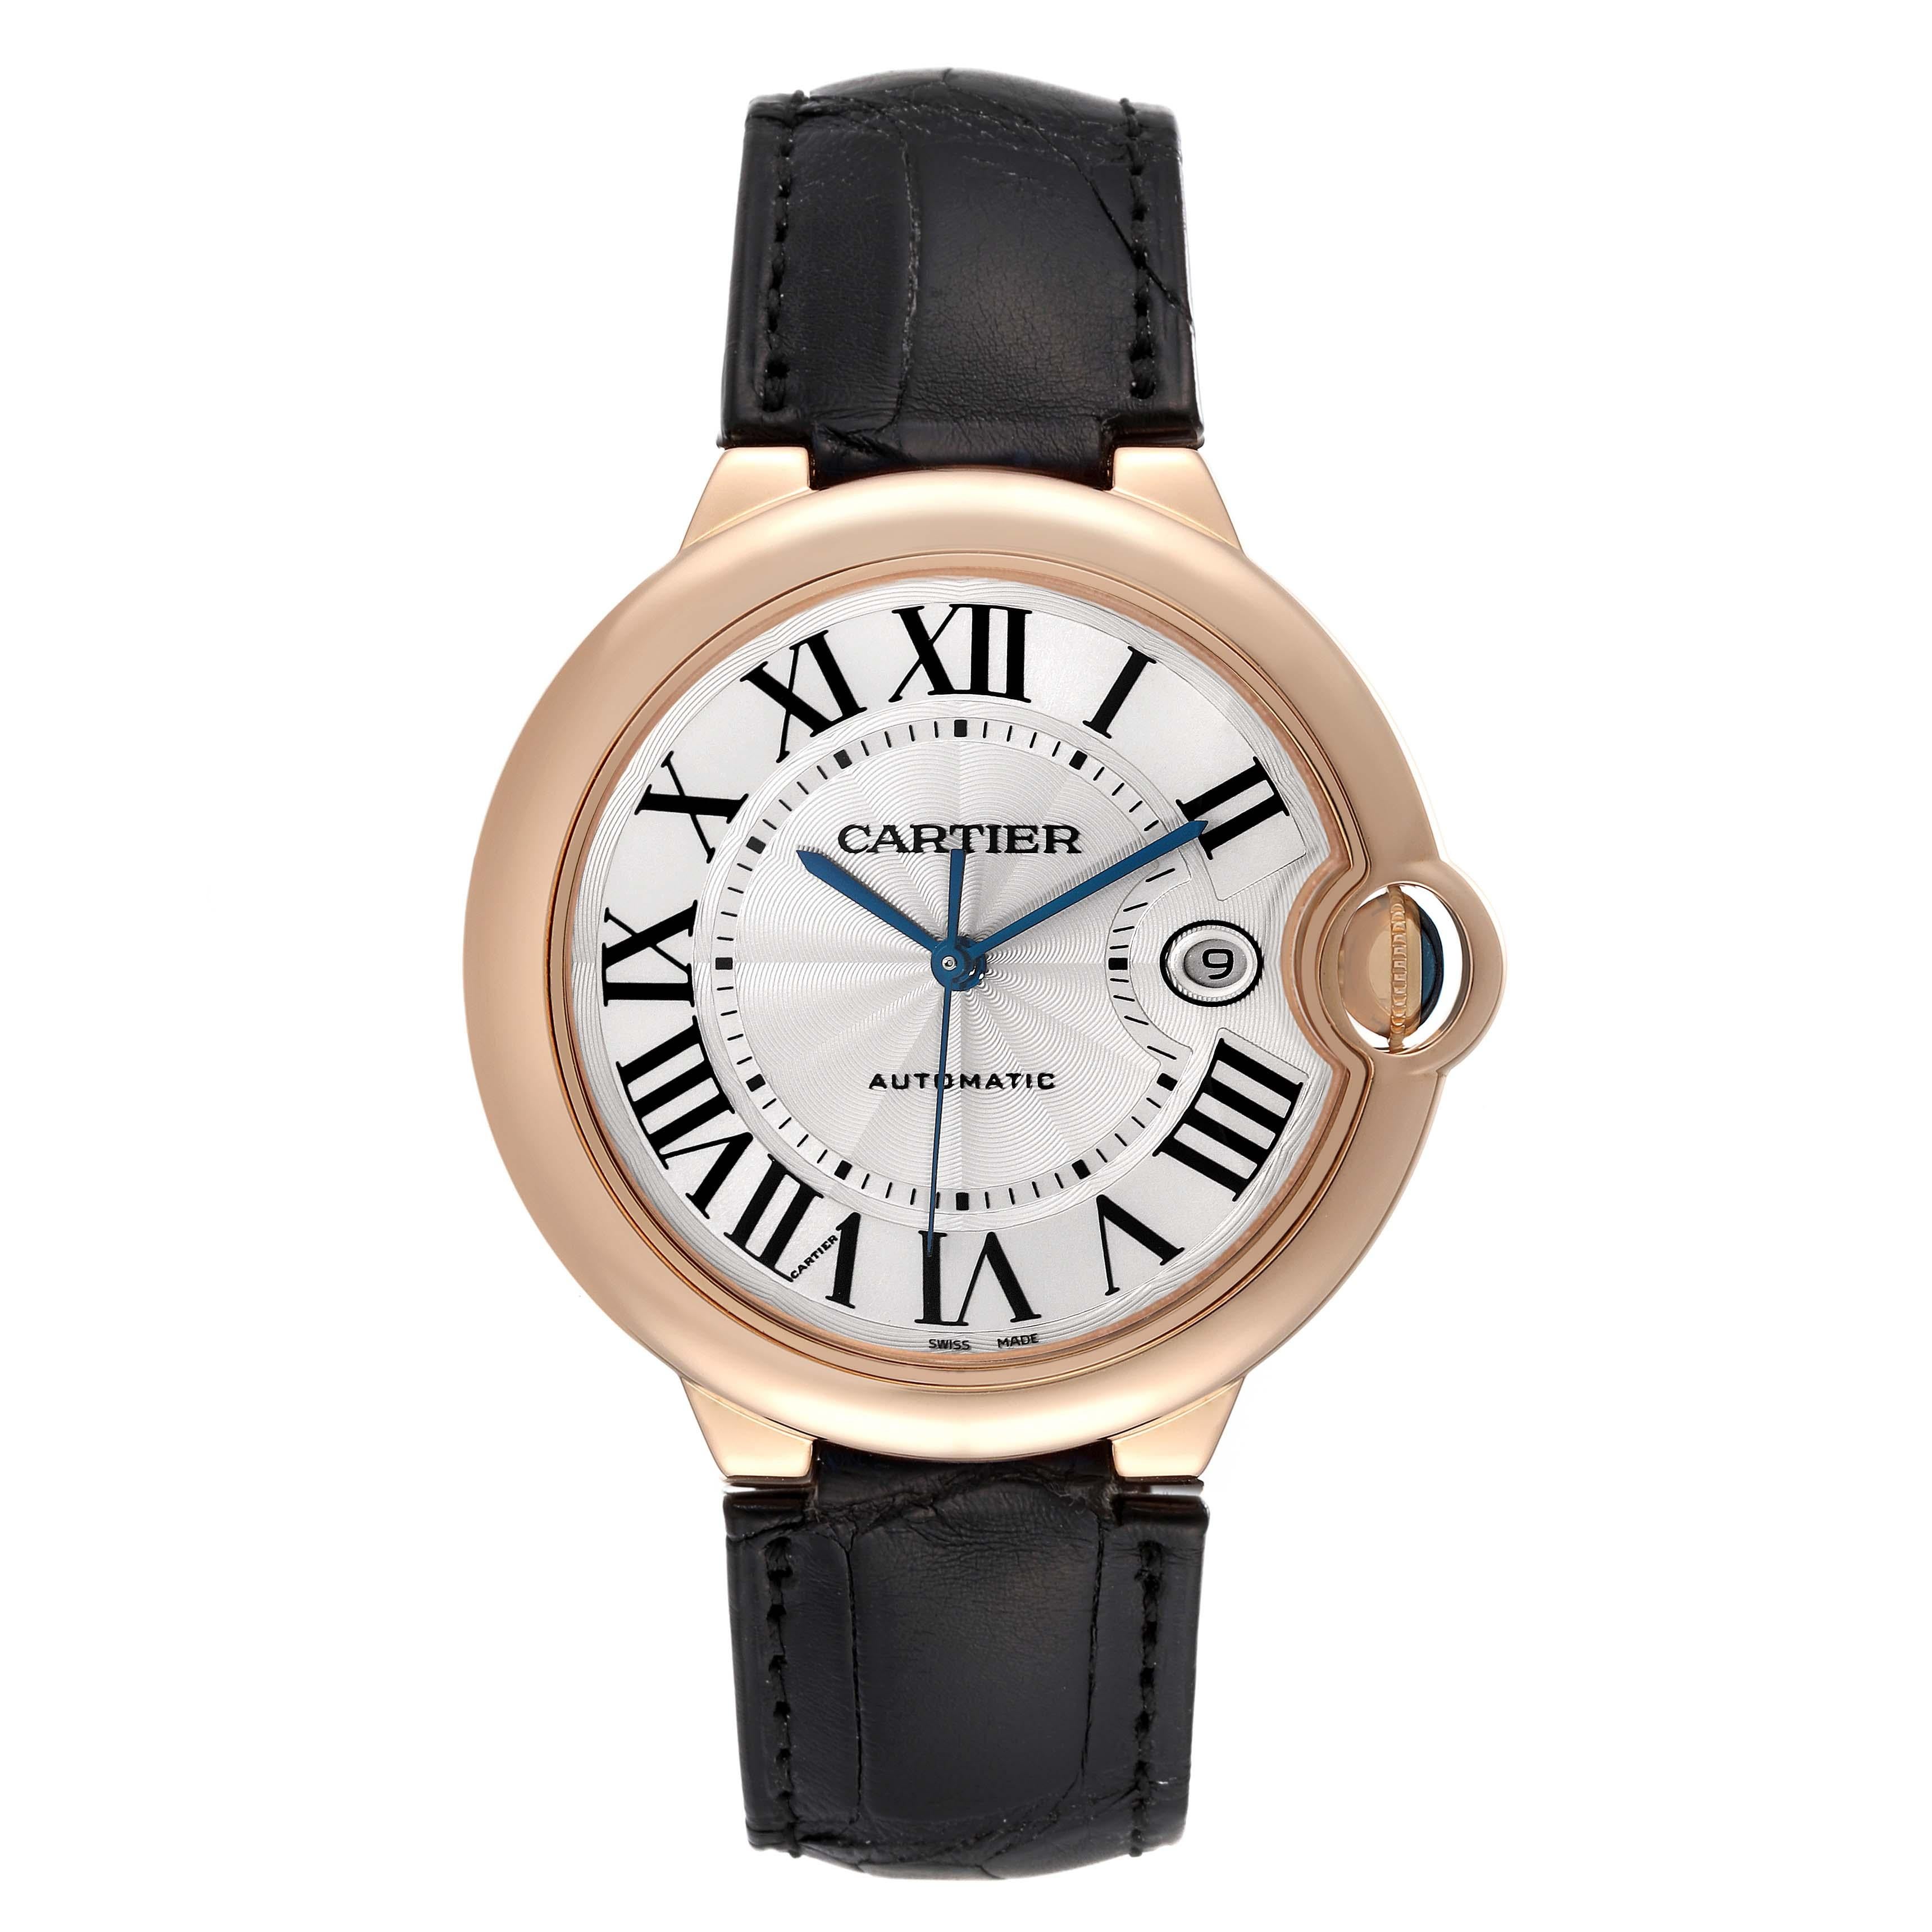 Cartier Ballon Bleu Rose Gold Automatic Mens Watch W6900651. Automatic self-winding movement. 18K rose gold case 42.0 mm in diameter. Fluted crown set with the blue sapphire cabochon. 18K rose gold smooth bezel. Scratch resistant sapphire crystal.